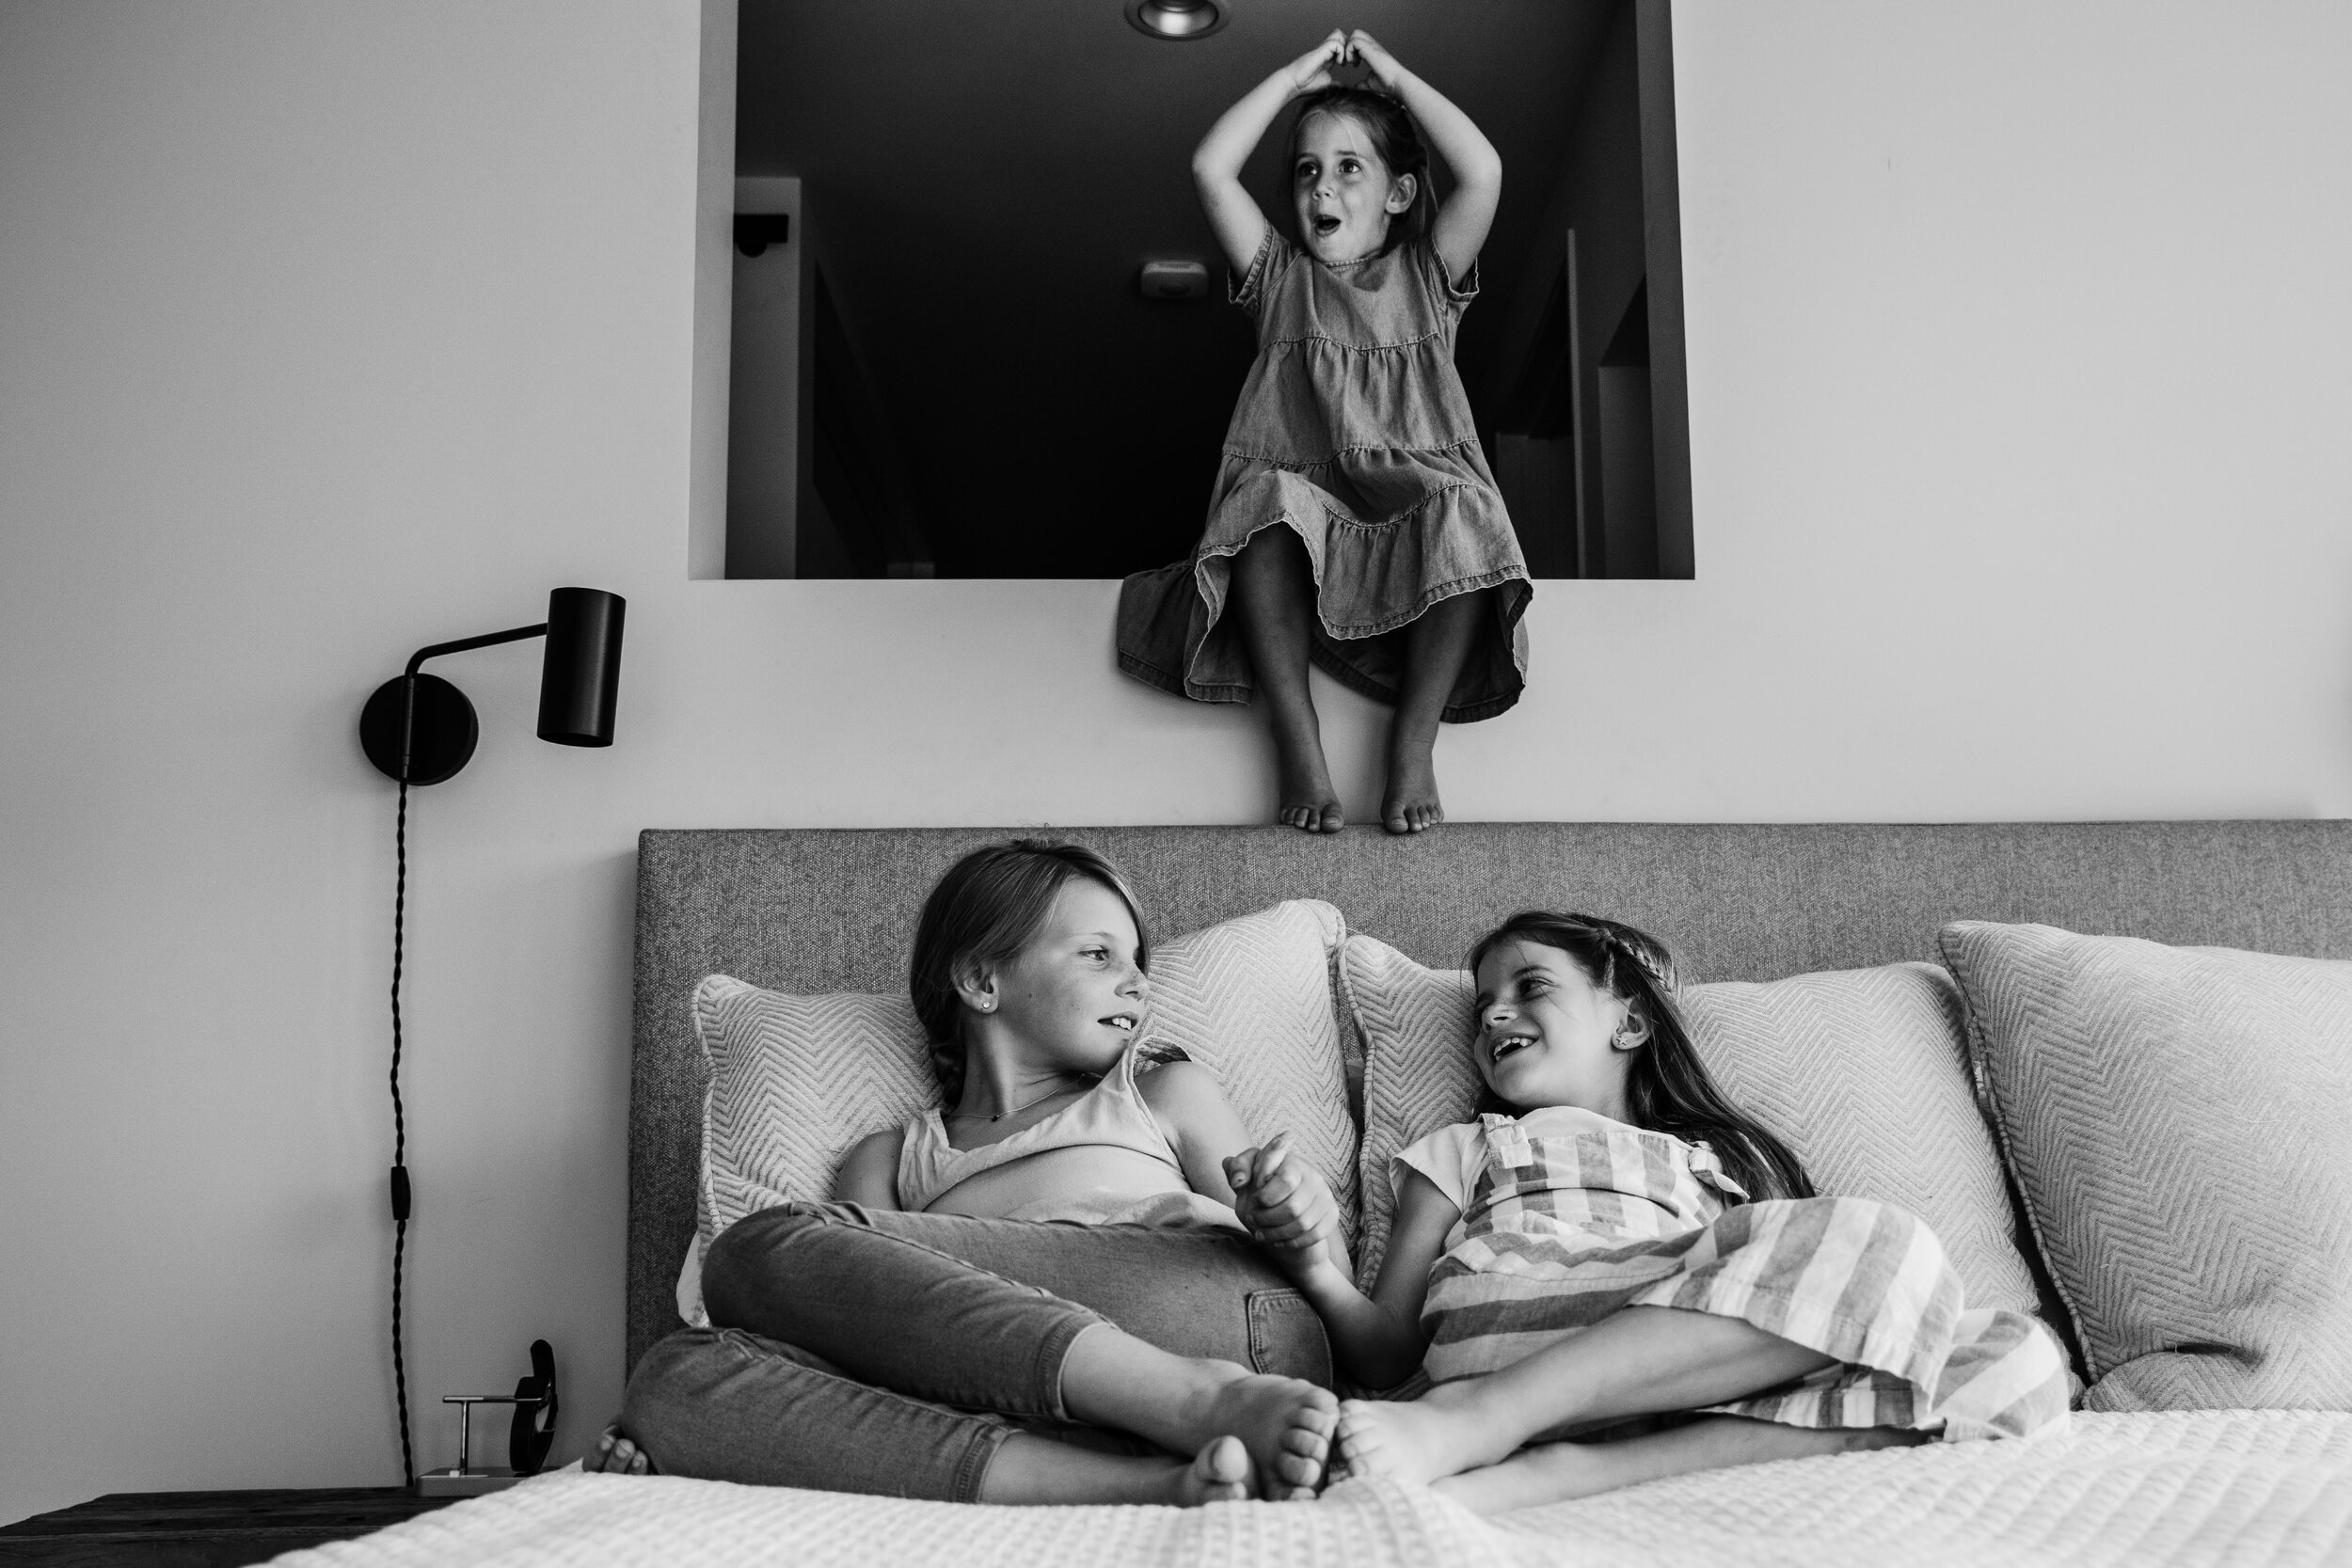 Girls being playful during a family photo session